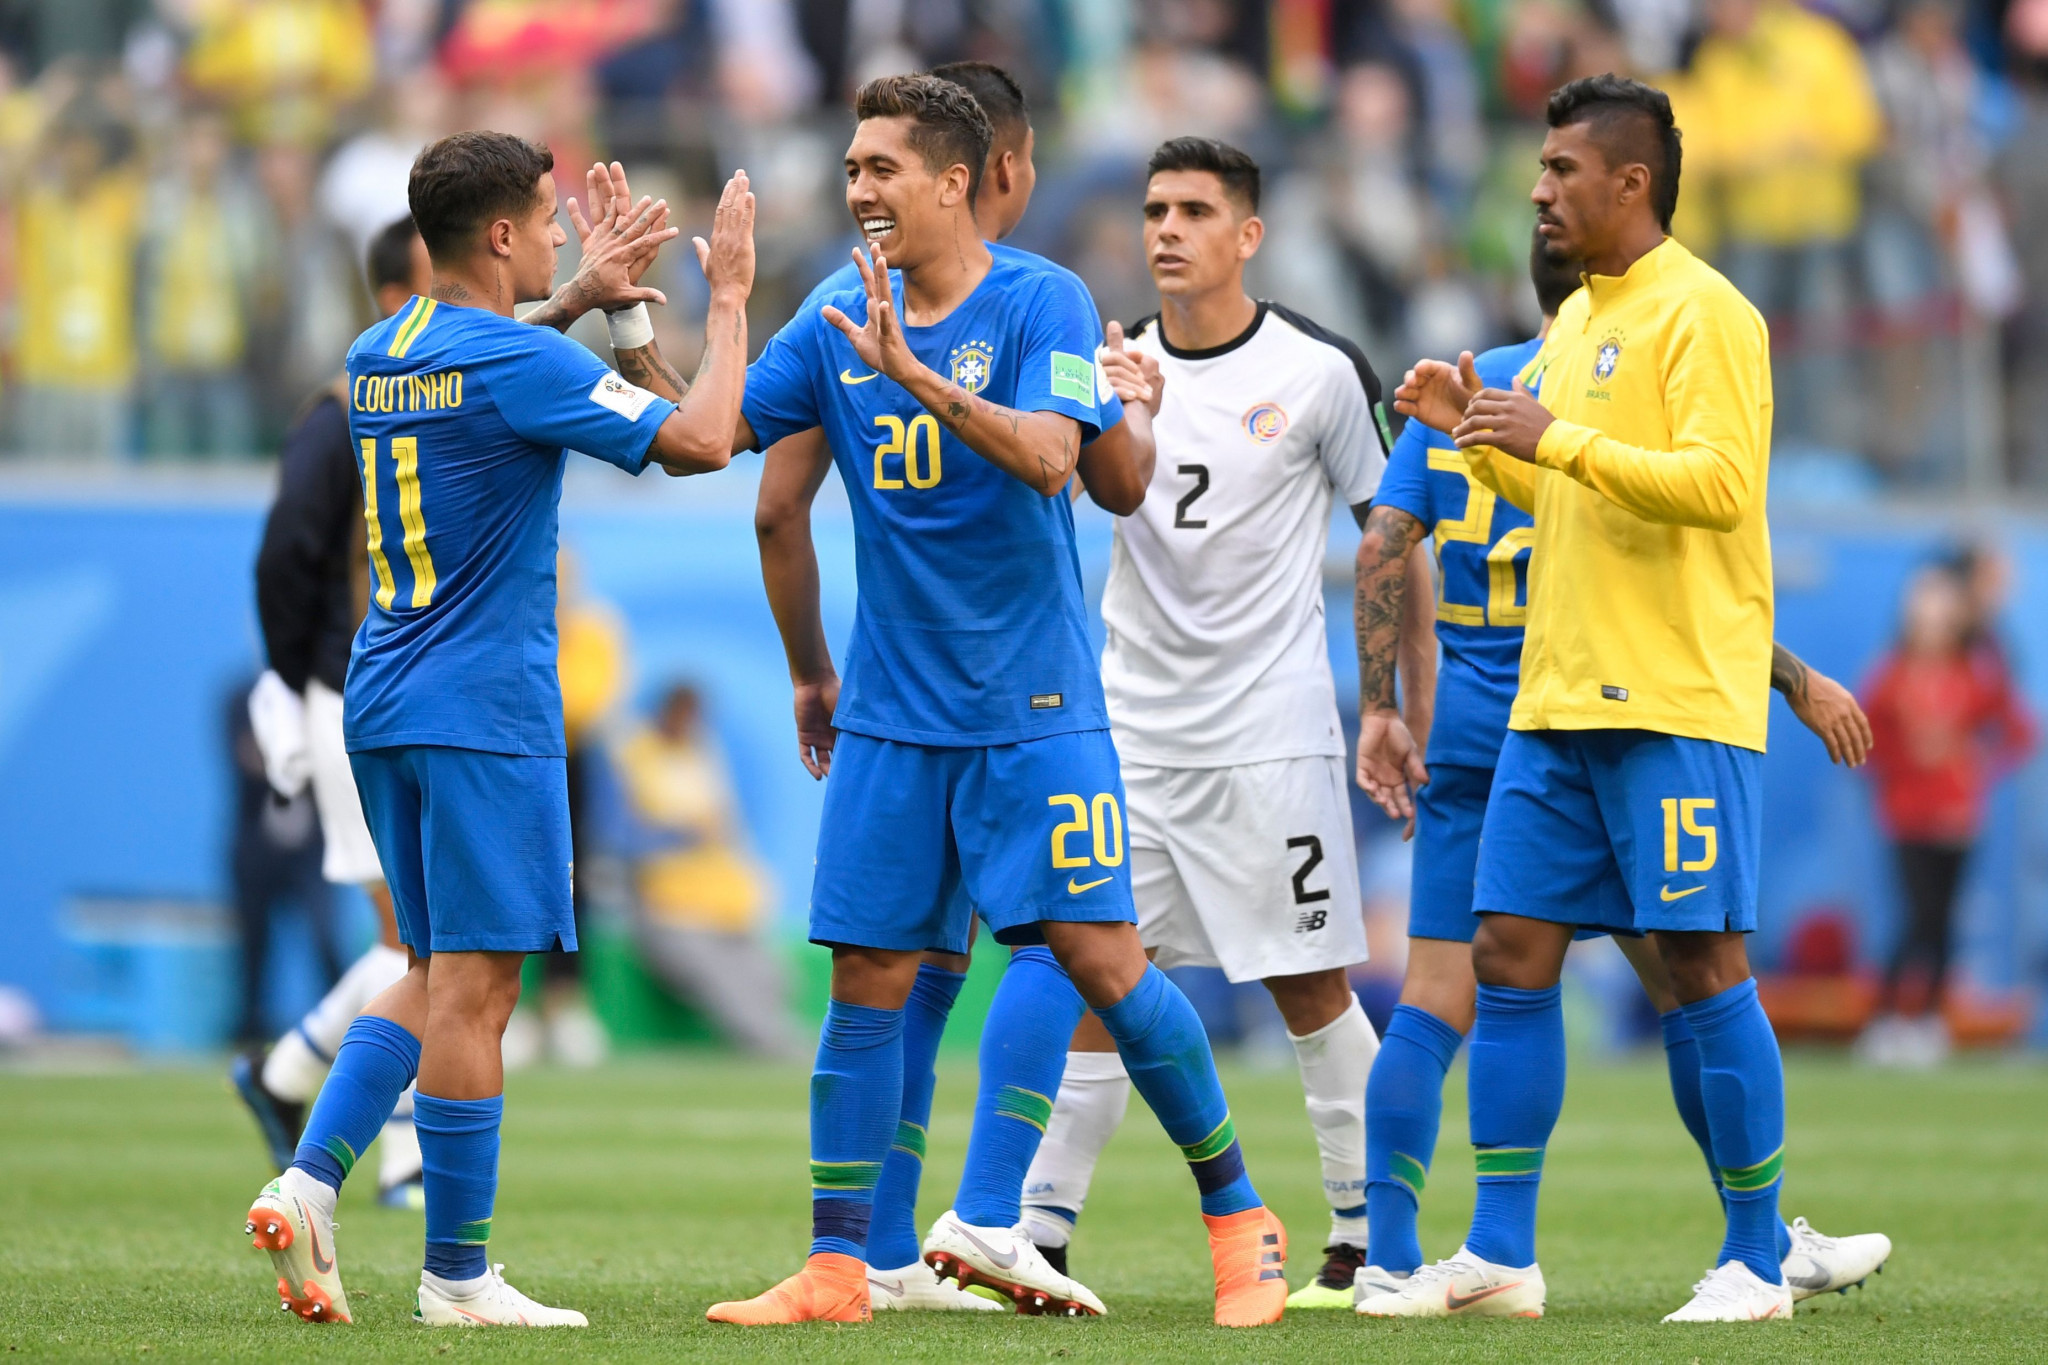 Brazil leave it late to claim victory over Costa Rica at FIFA World Cup